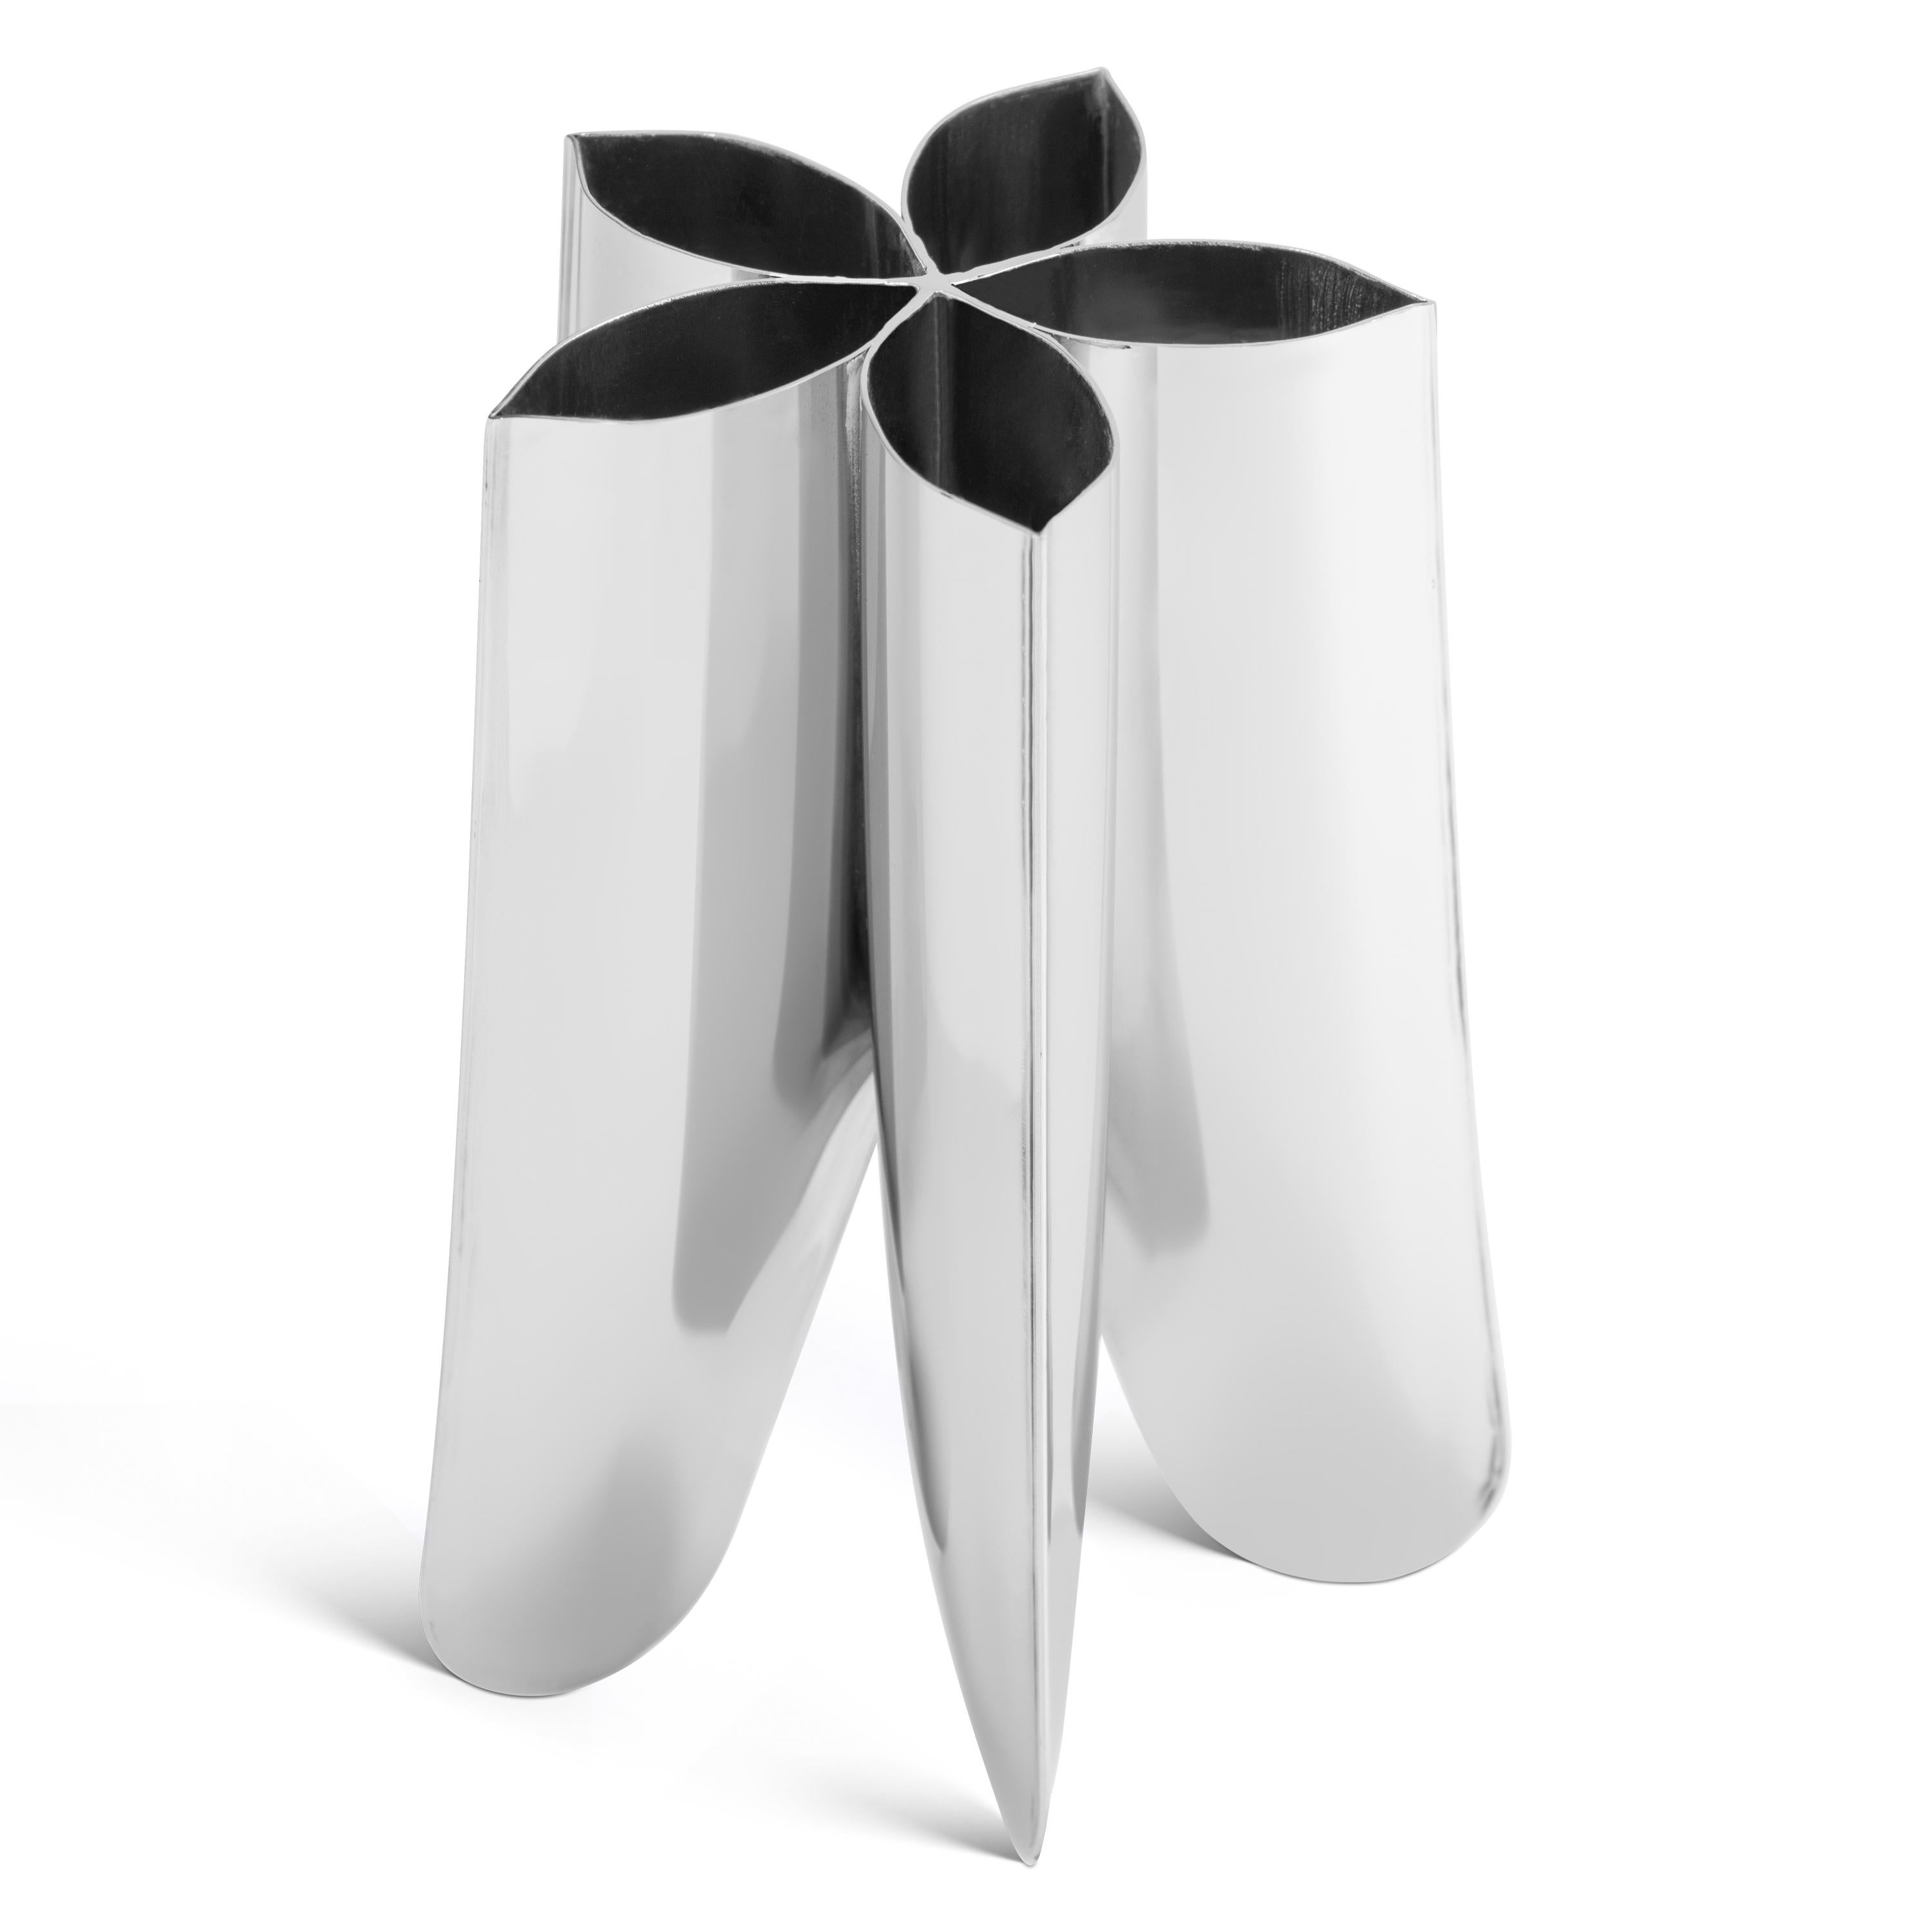 Polish Contemporary Vase, 'Rotation Vase' by Zieta, Large, Stainless Steel For Sale